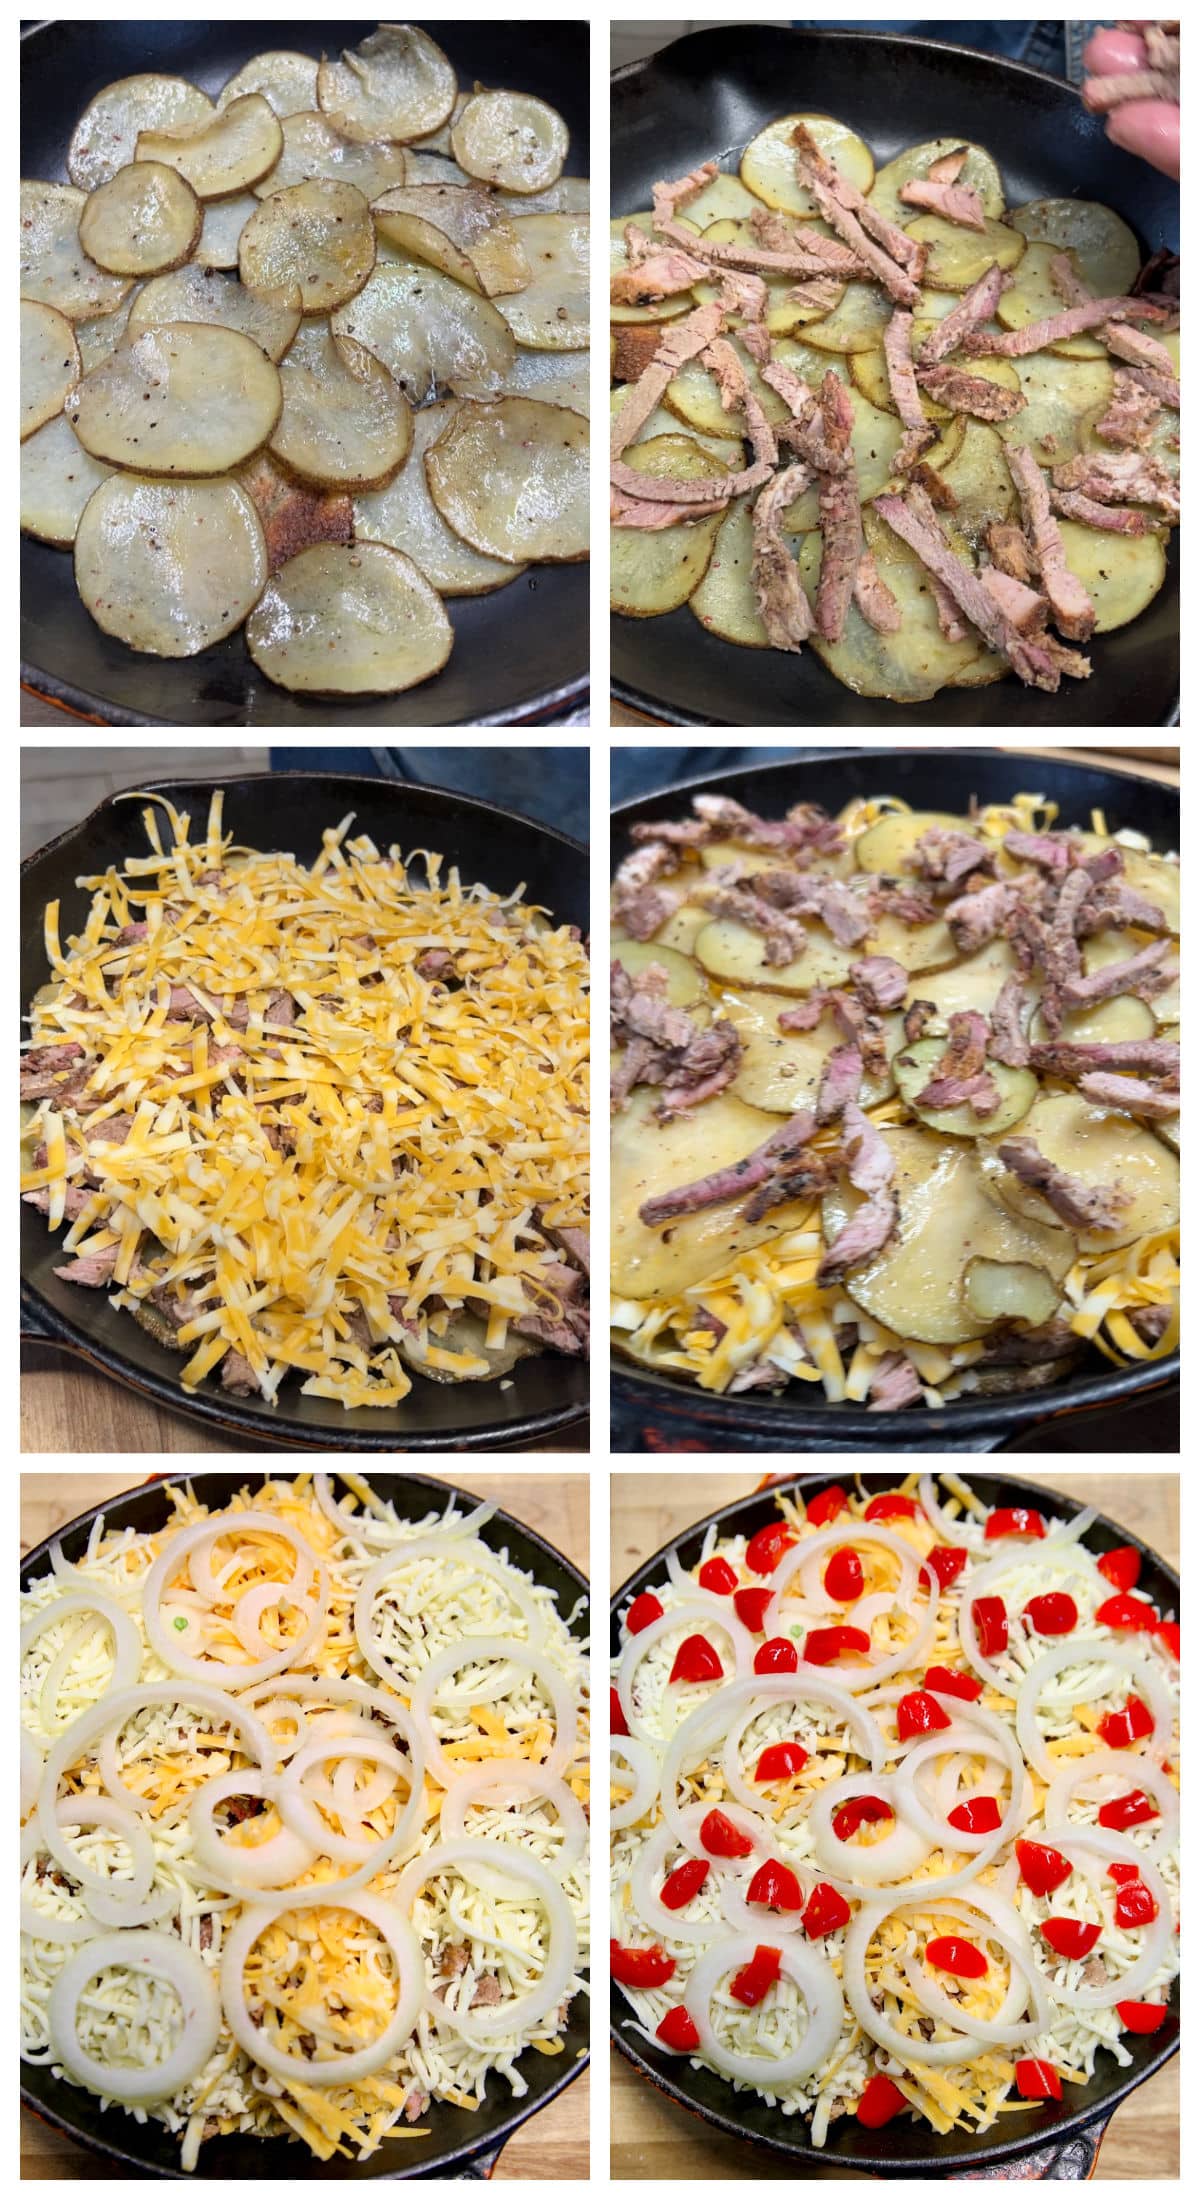 Collage layering potato slices with brisket, cheese, onions, tomatoes.